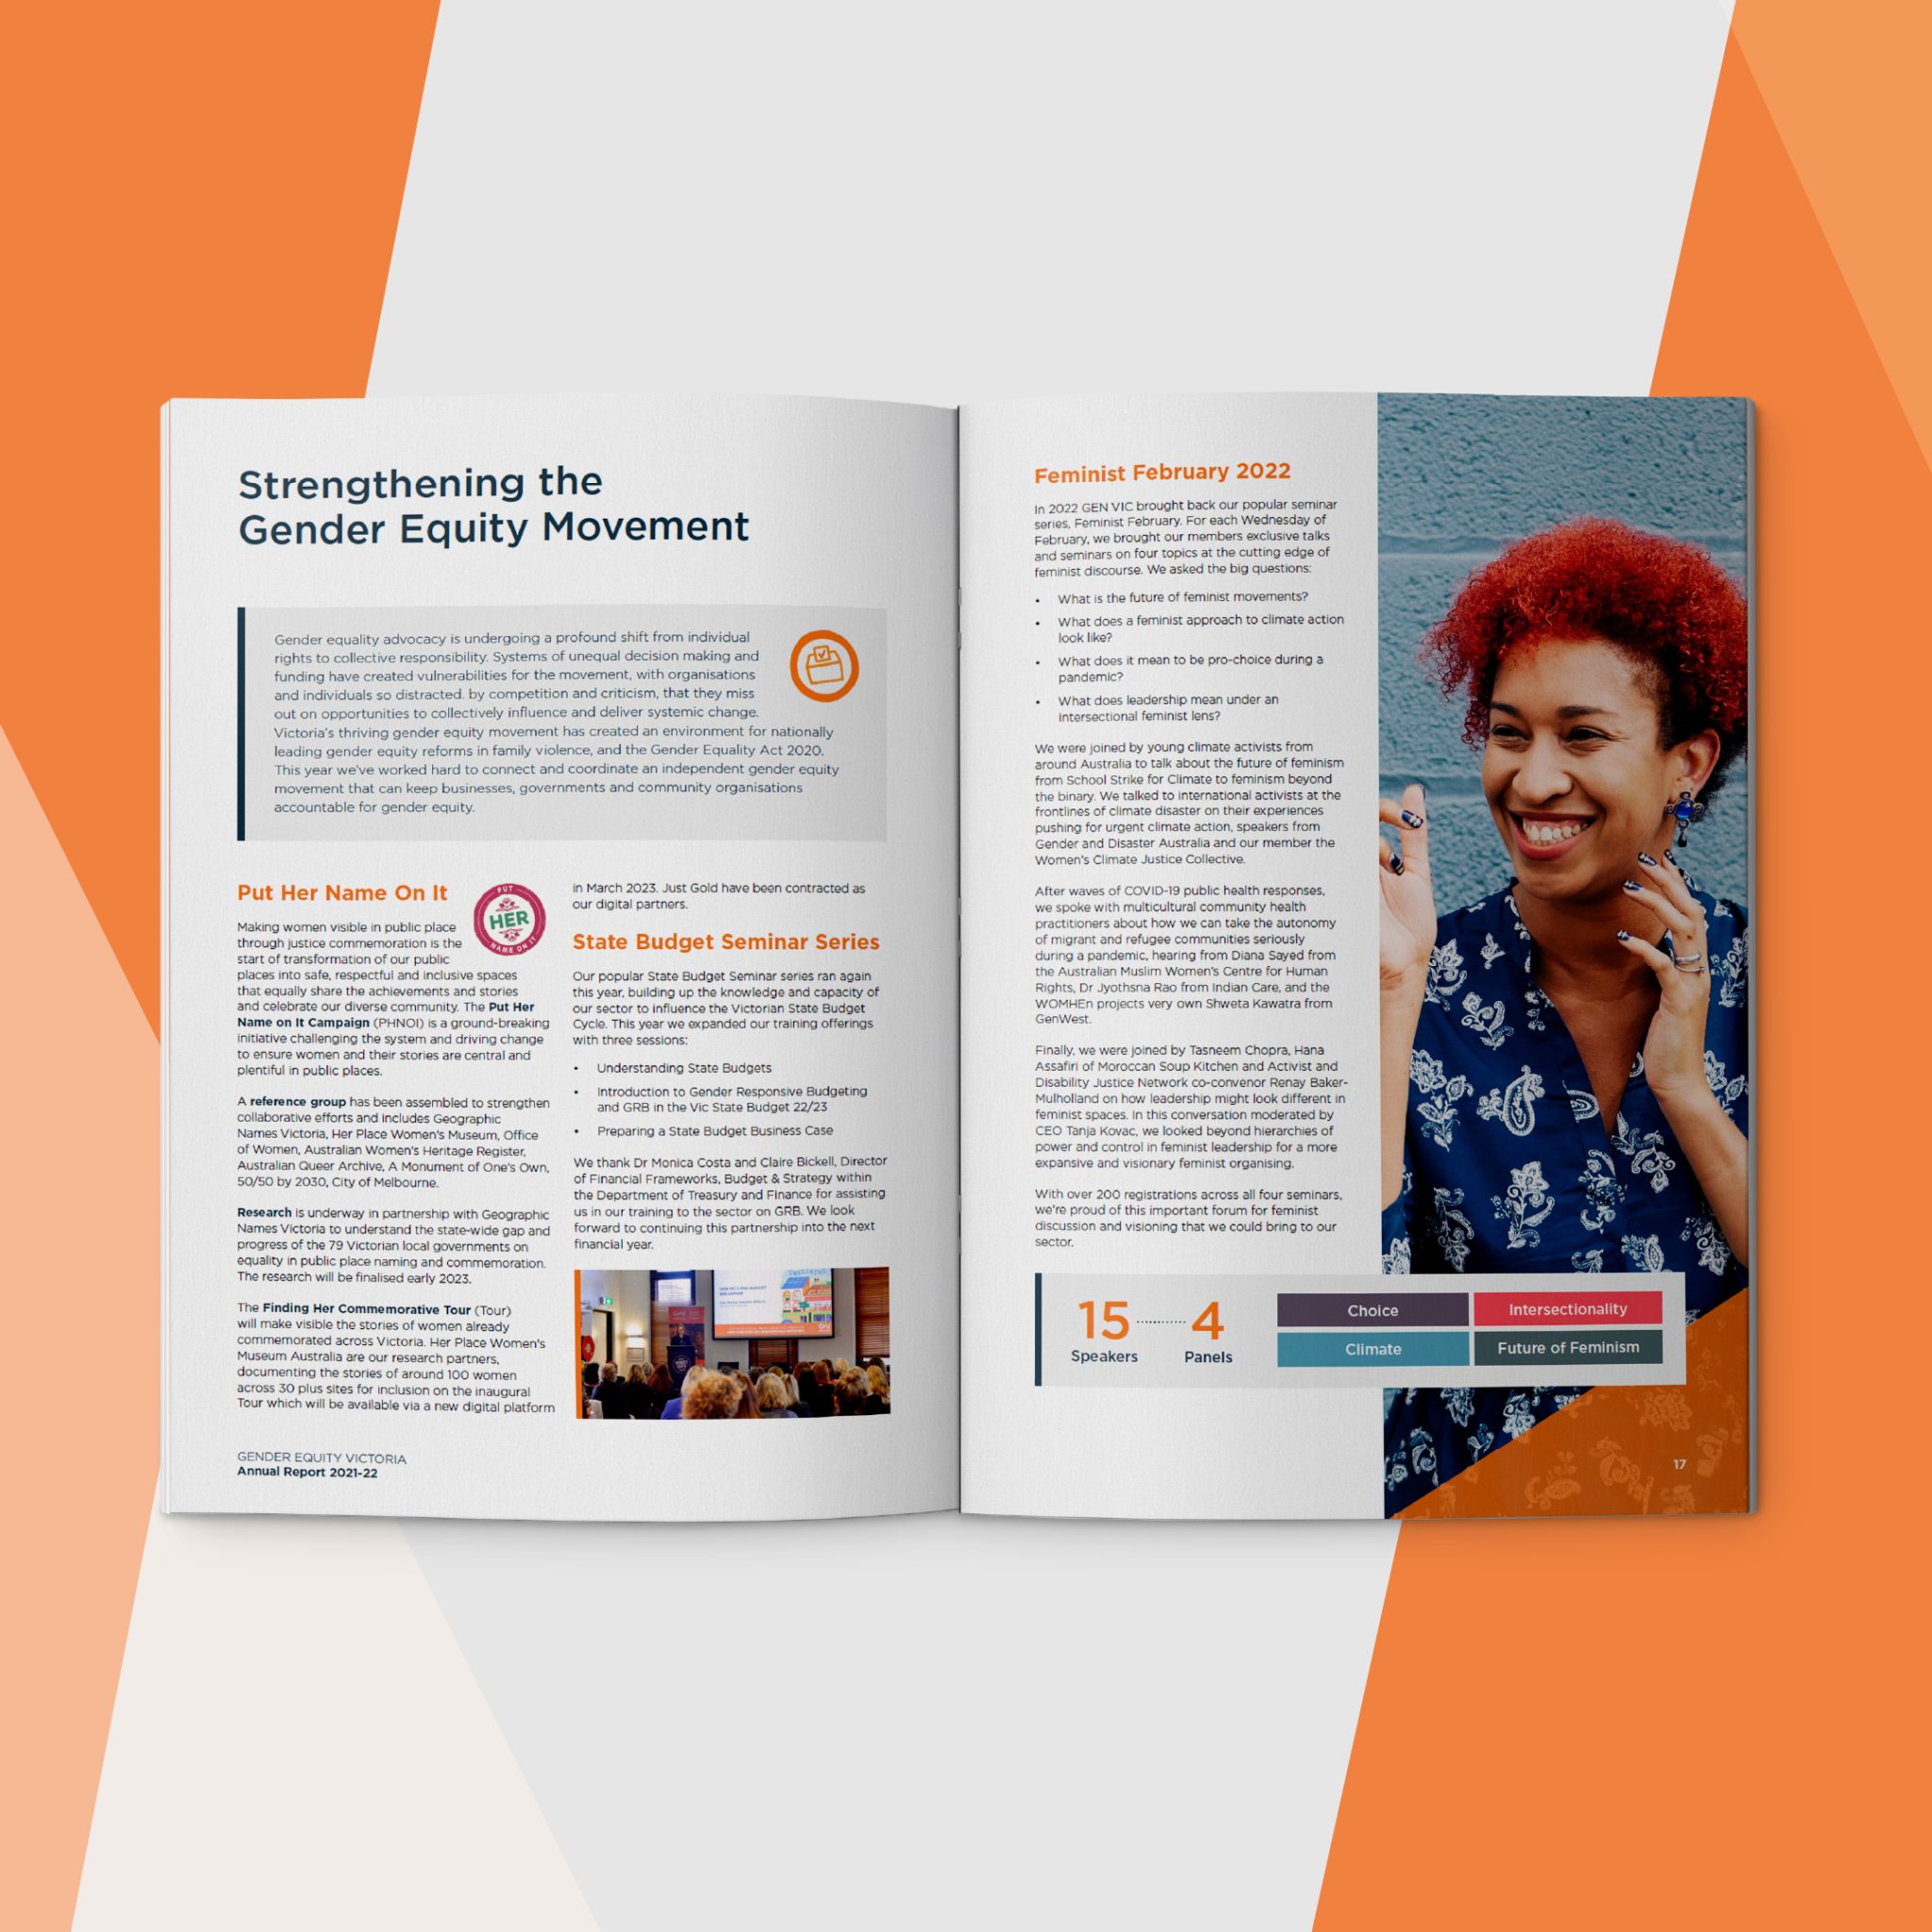 Gender Equity Victoria's 2022 Annual Report - 'Strengthening the Gender Equity Movement' spread mockup